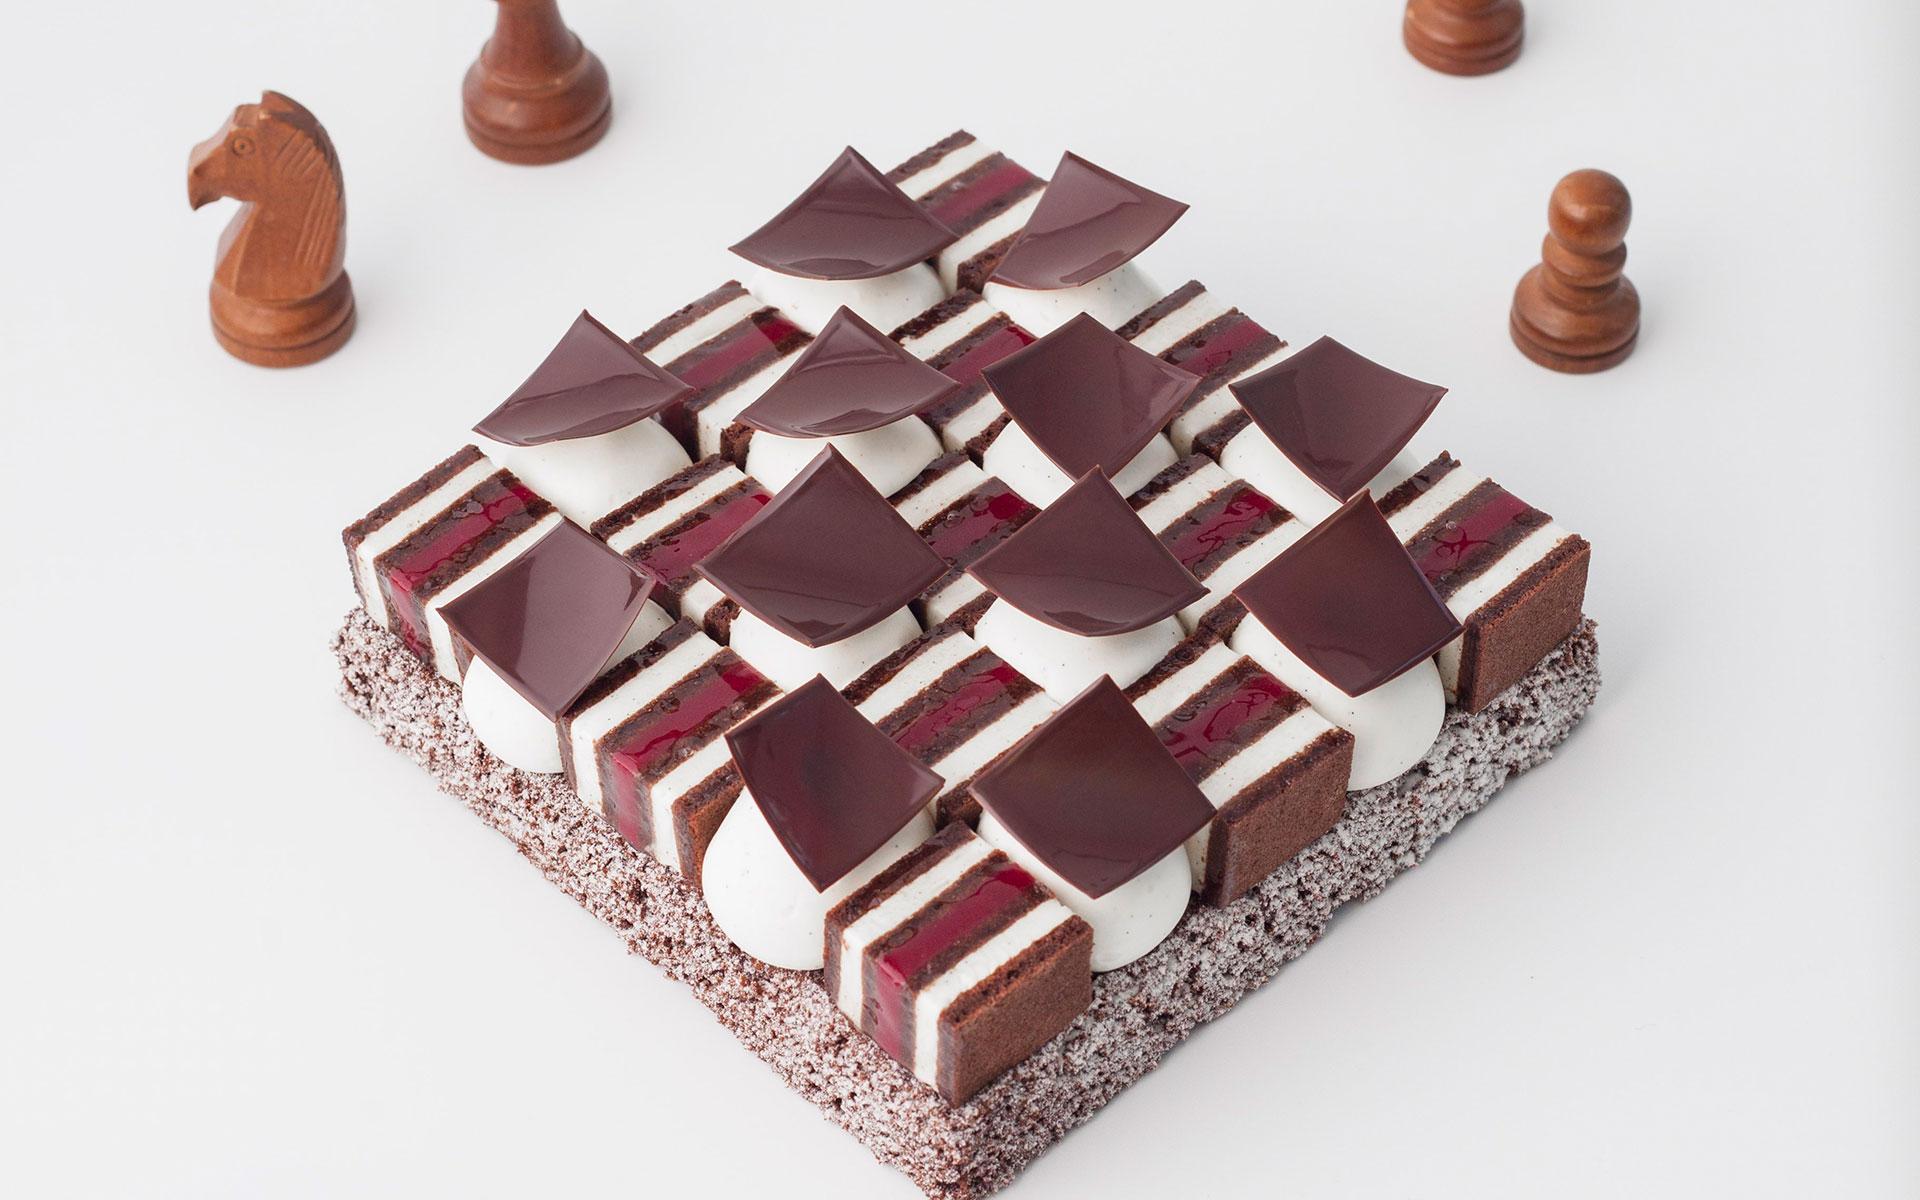 Checkmate - Pastry and bakery - Elle & Vire Professionnel